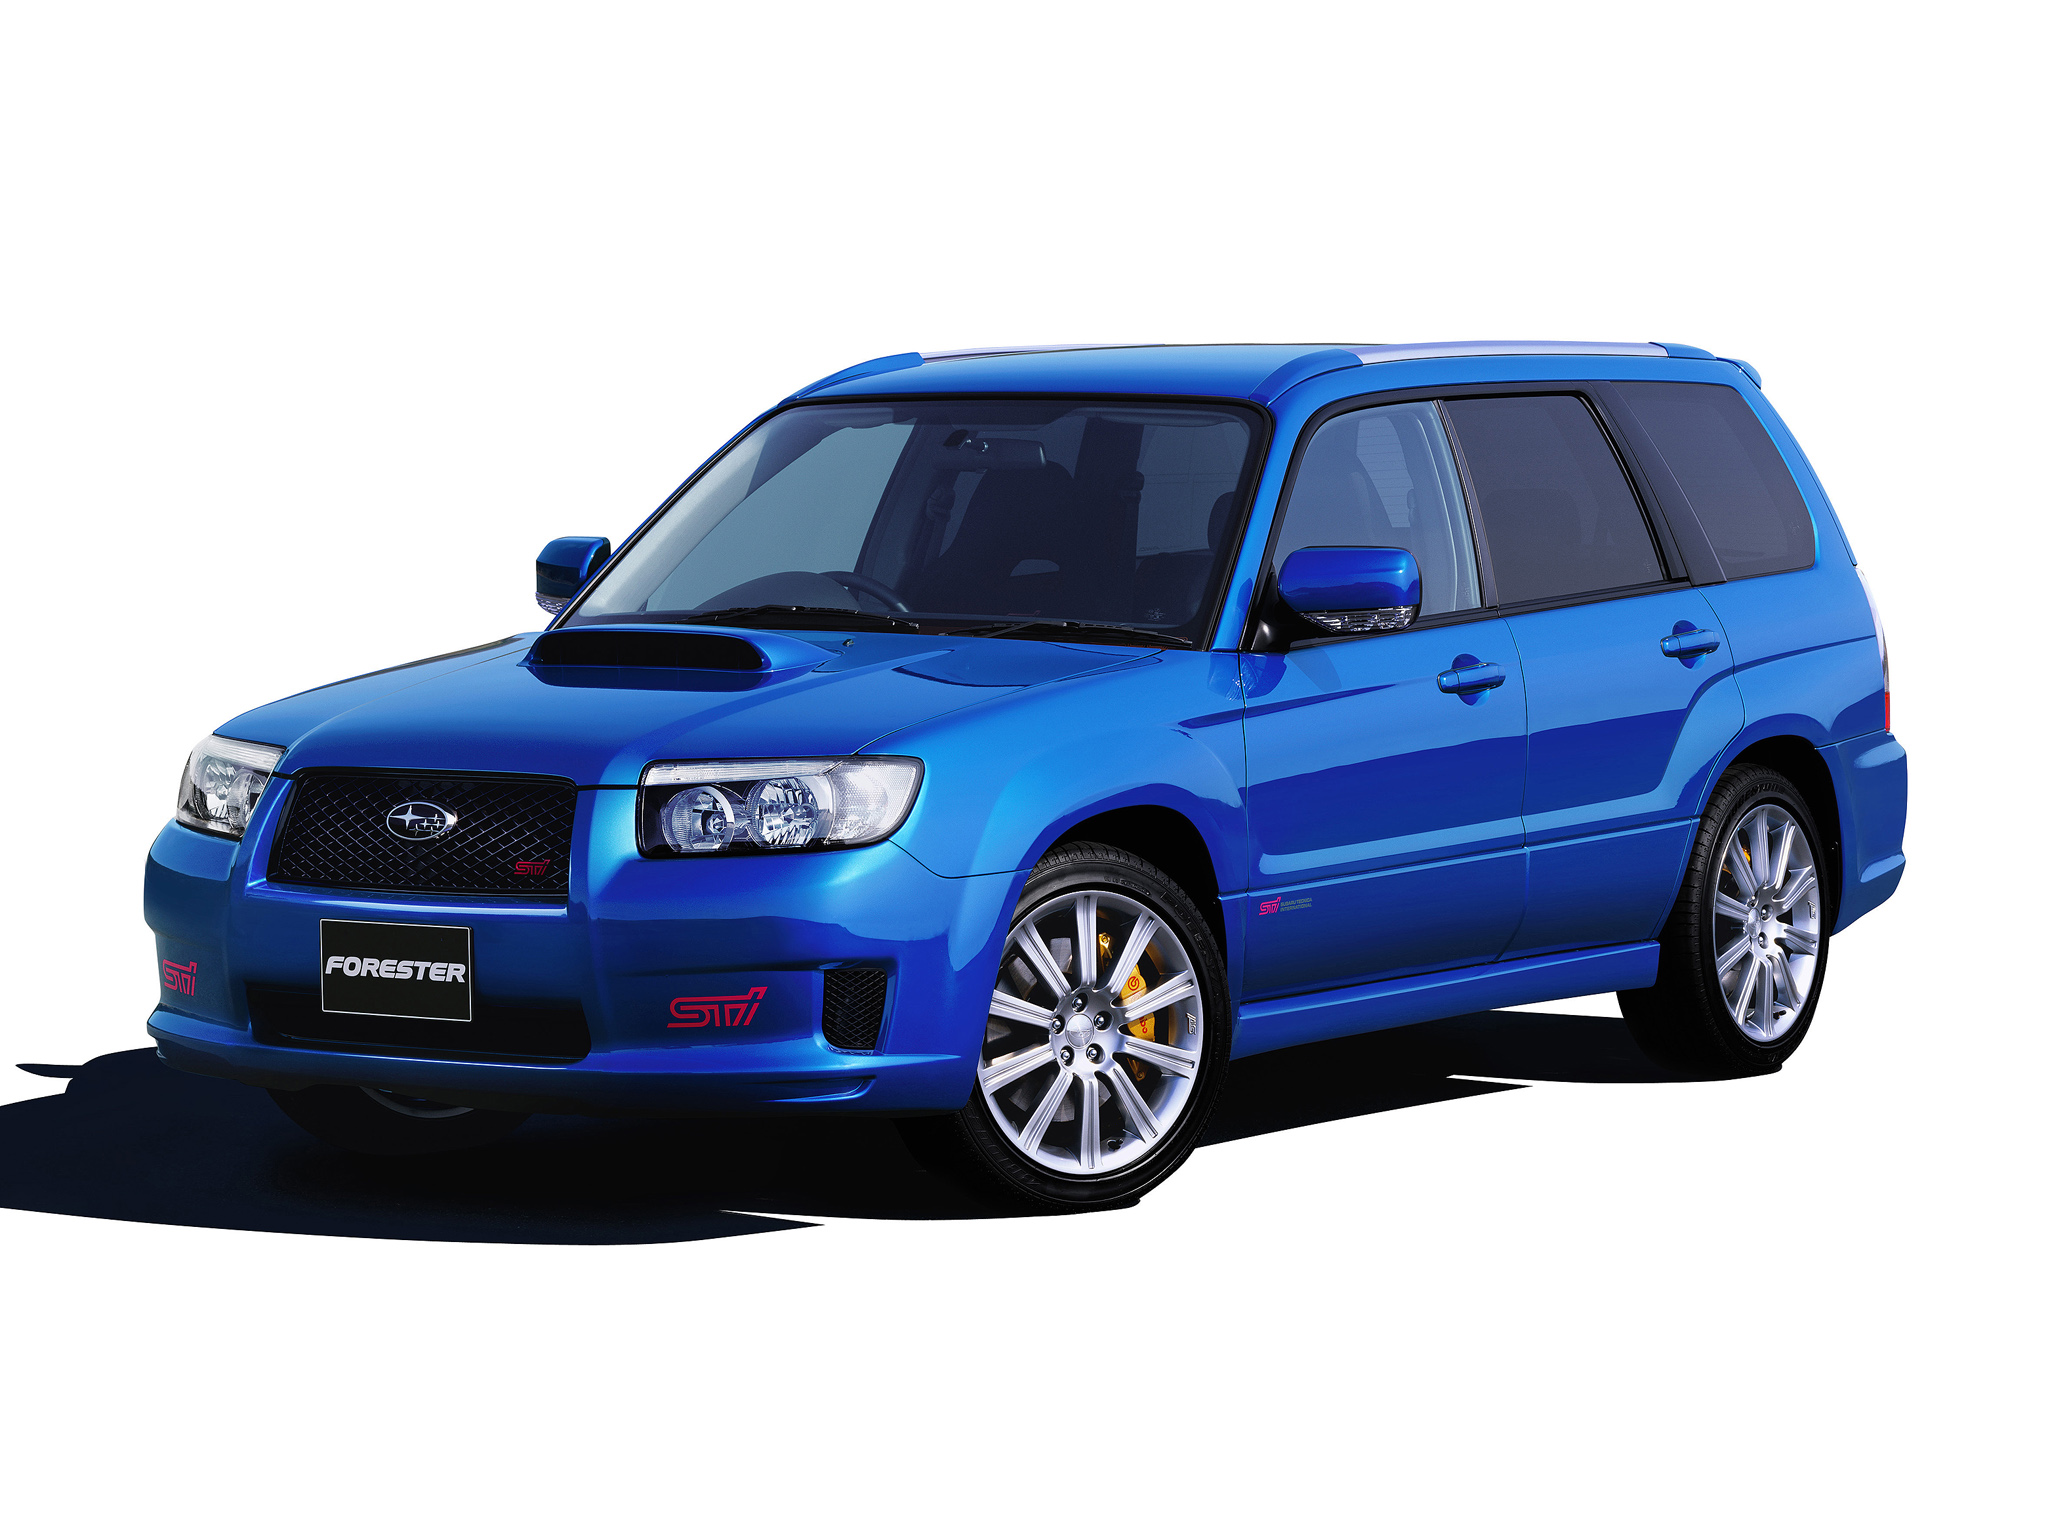 General 2048x1536 car Subaru subaru forester blue cars vehicle simple background white background scoop station wagon Japanese cars